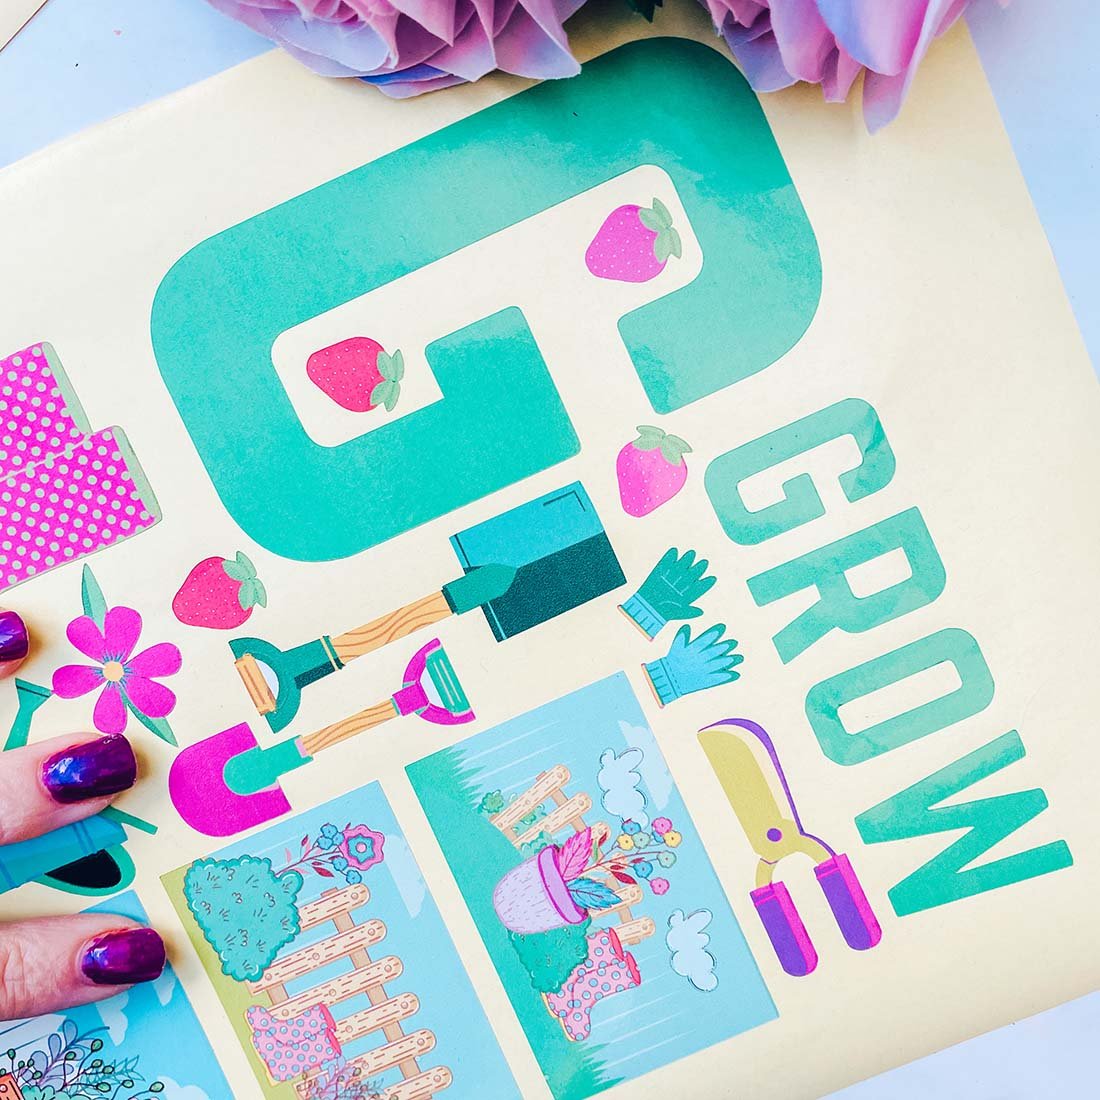 Free downloadable Gardening themed stickers for crafting and scrapbooking